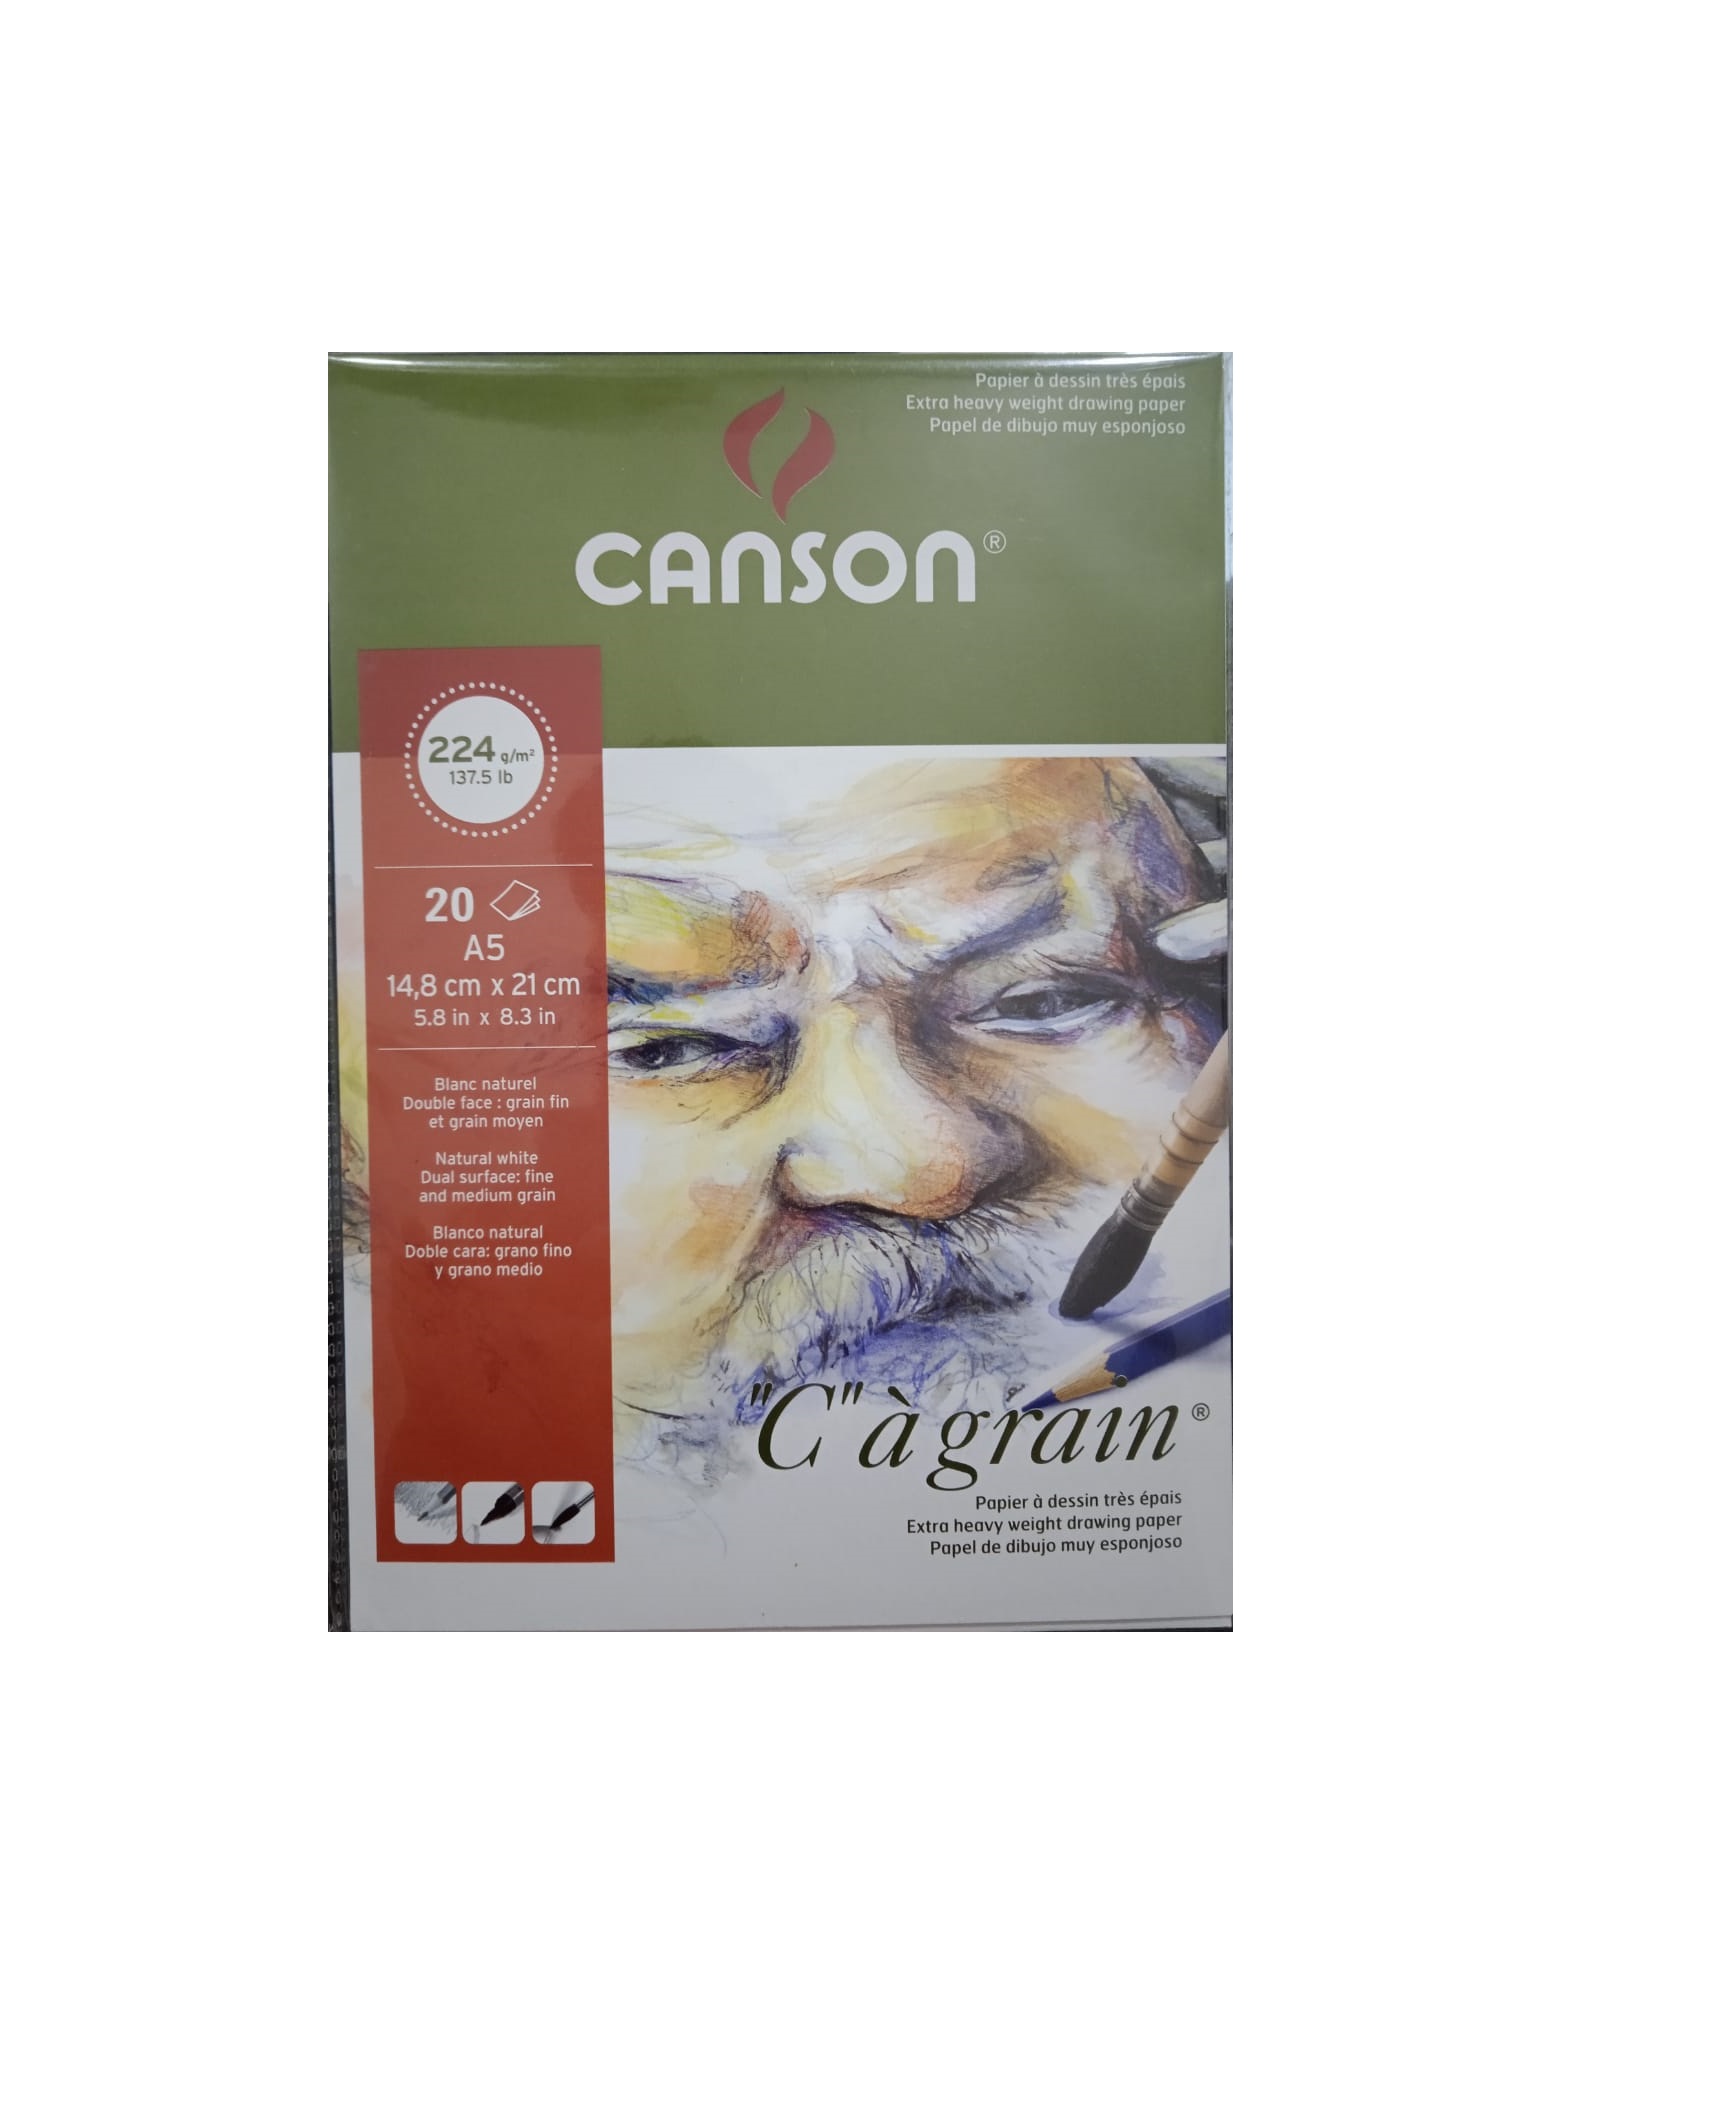 CANSON C-A GRAIN 224GSM DRAWING PAPER A5 SIZE (20 SHEETS)